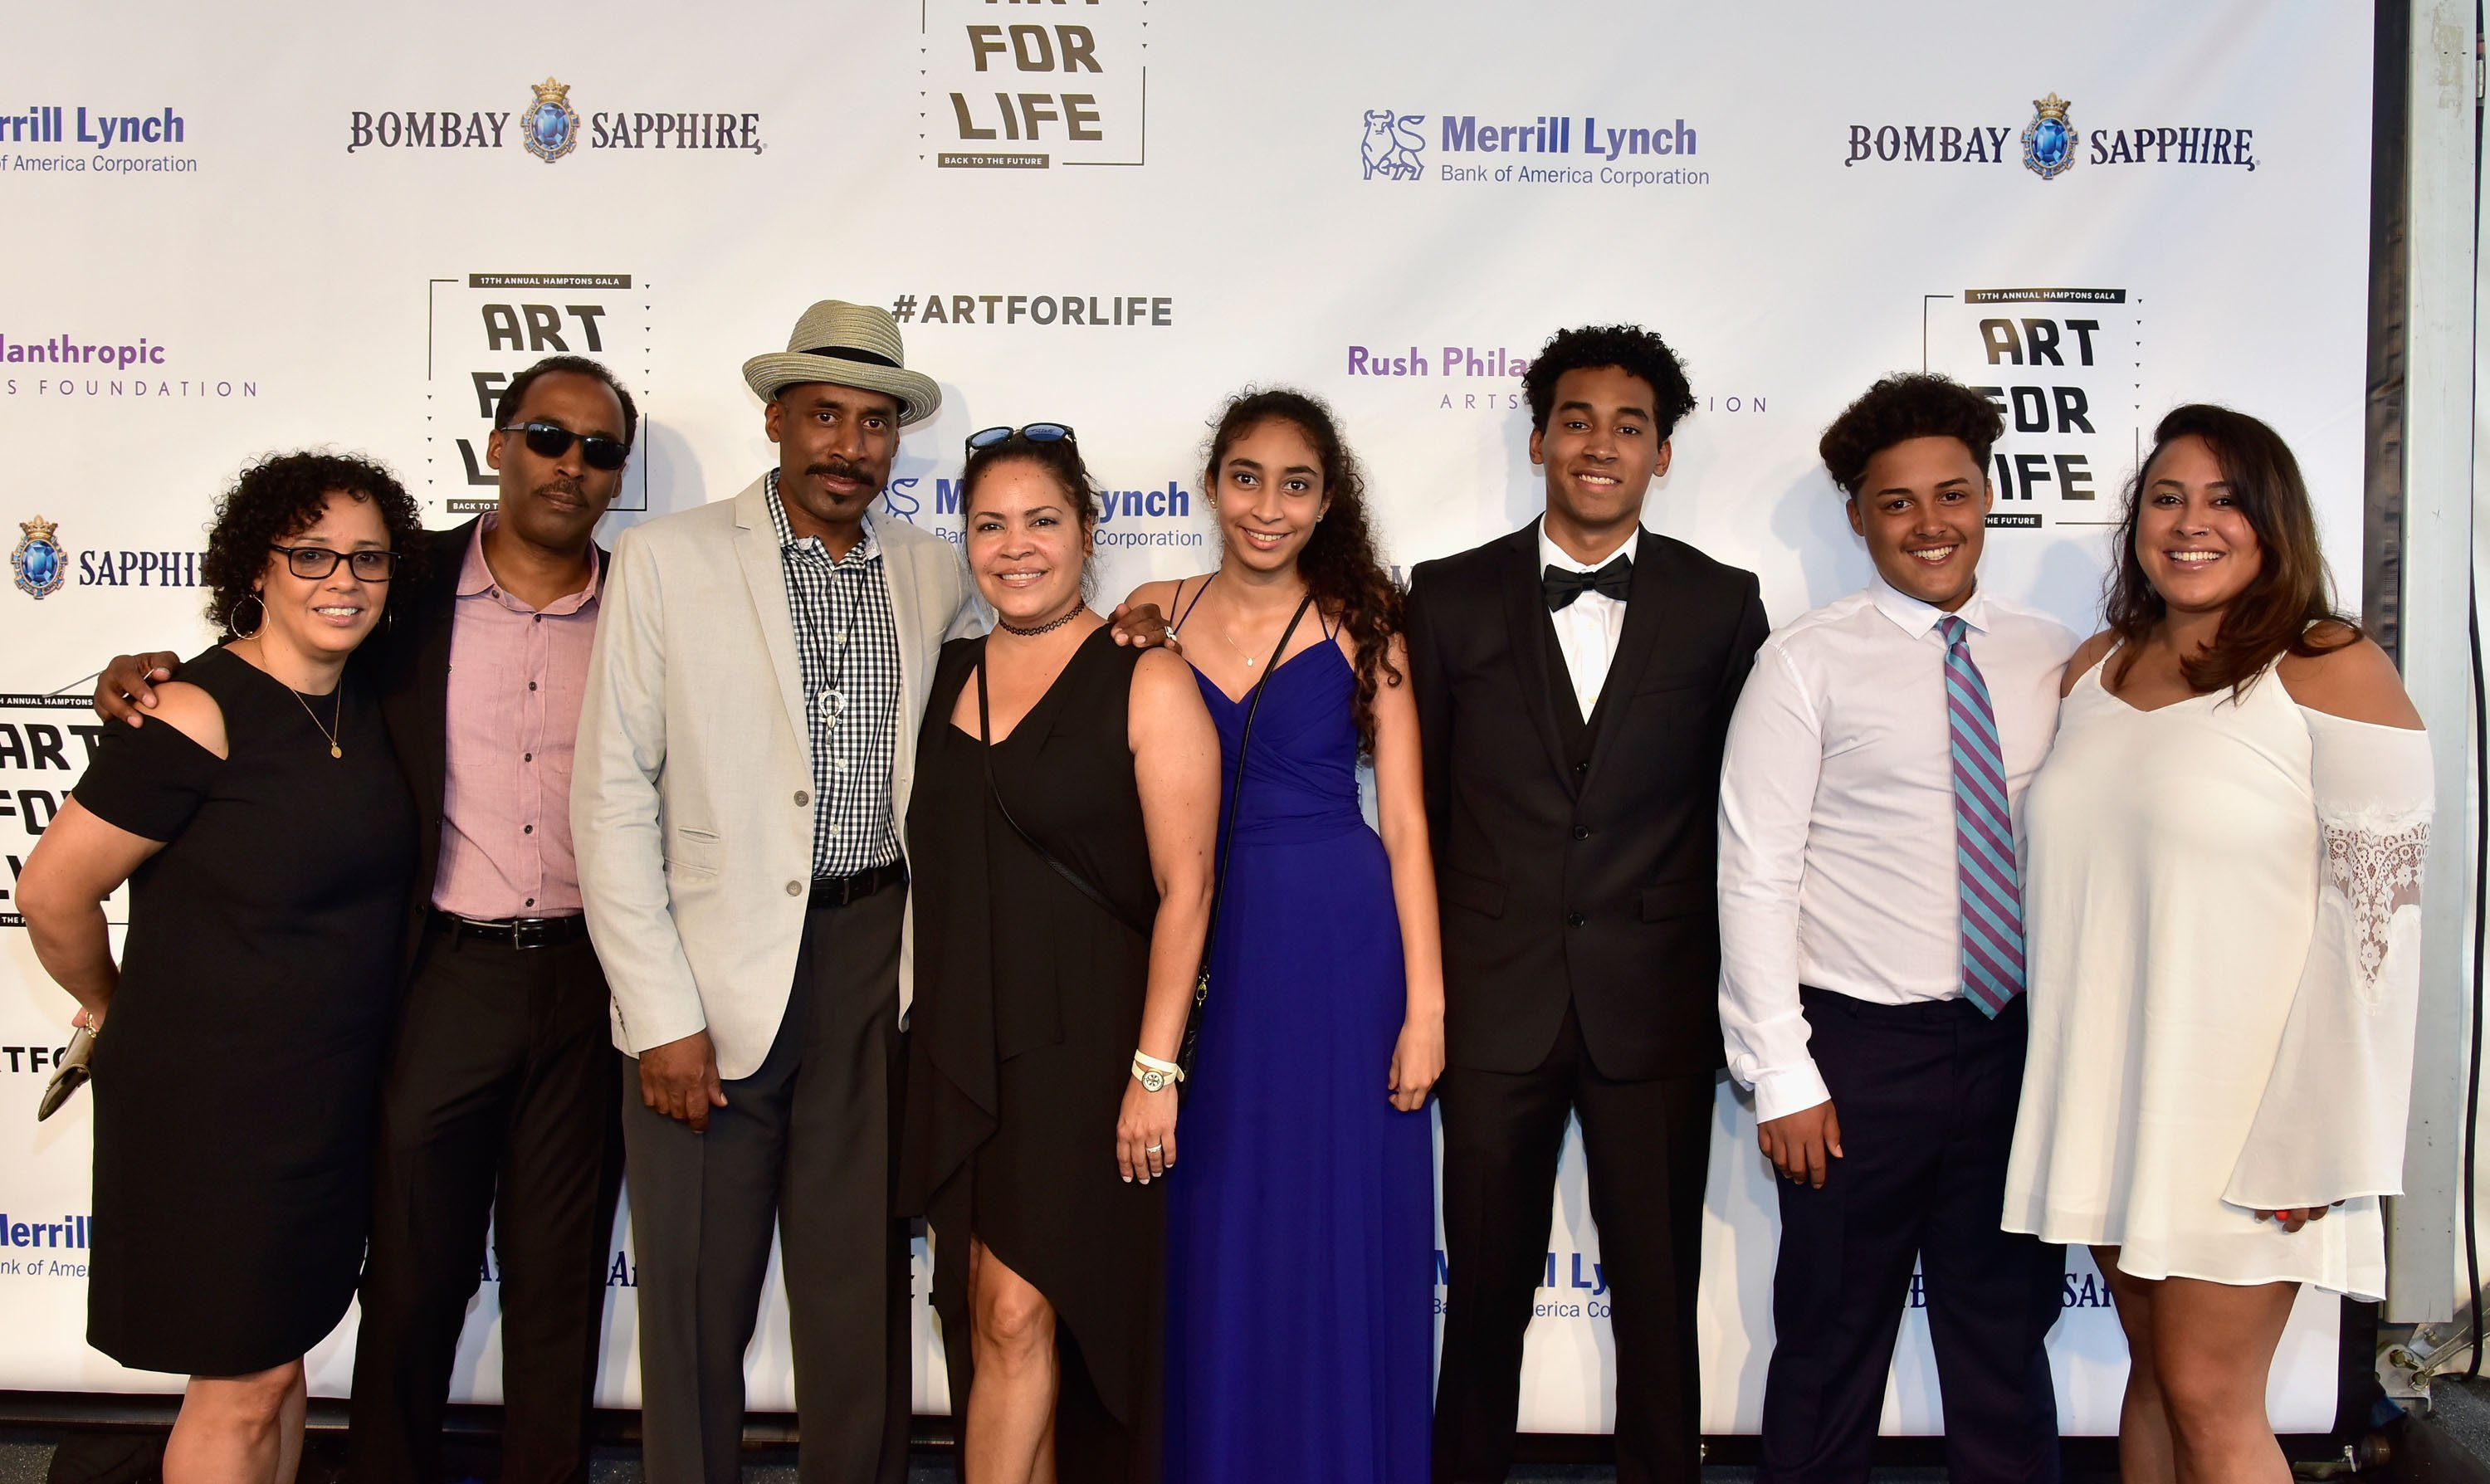 Nari Ward and guests attend Rush Philanthropic Arts Foundation's 2016 ART FOR LIFE Benefit presented by Bombay Sapphire Gin at Fairview Farms. Courtesy Eugene Gologursky/Getty Images for Bombay Sapphire.